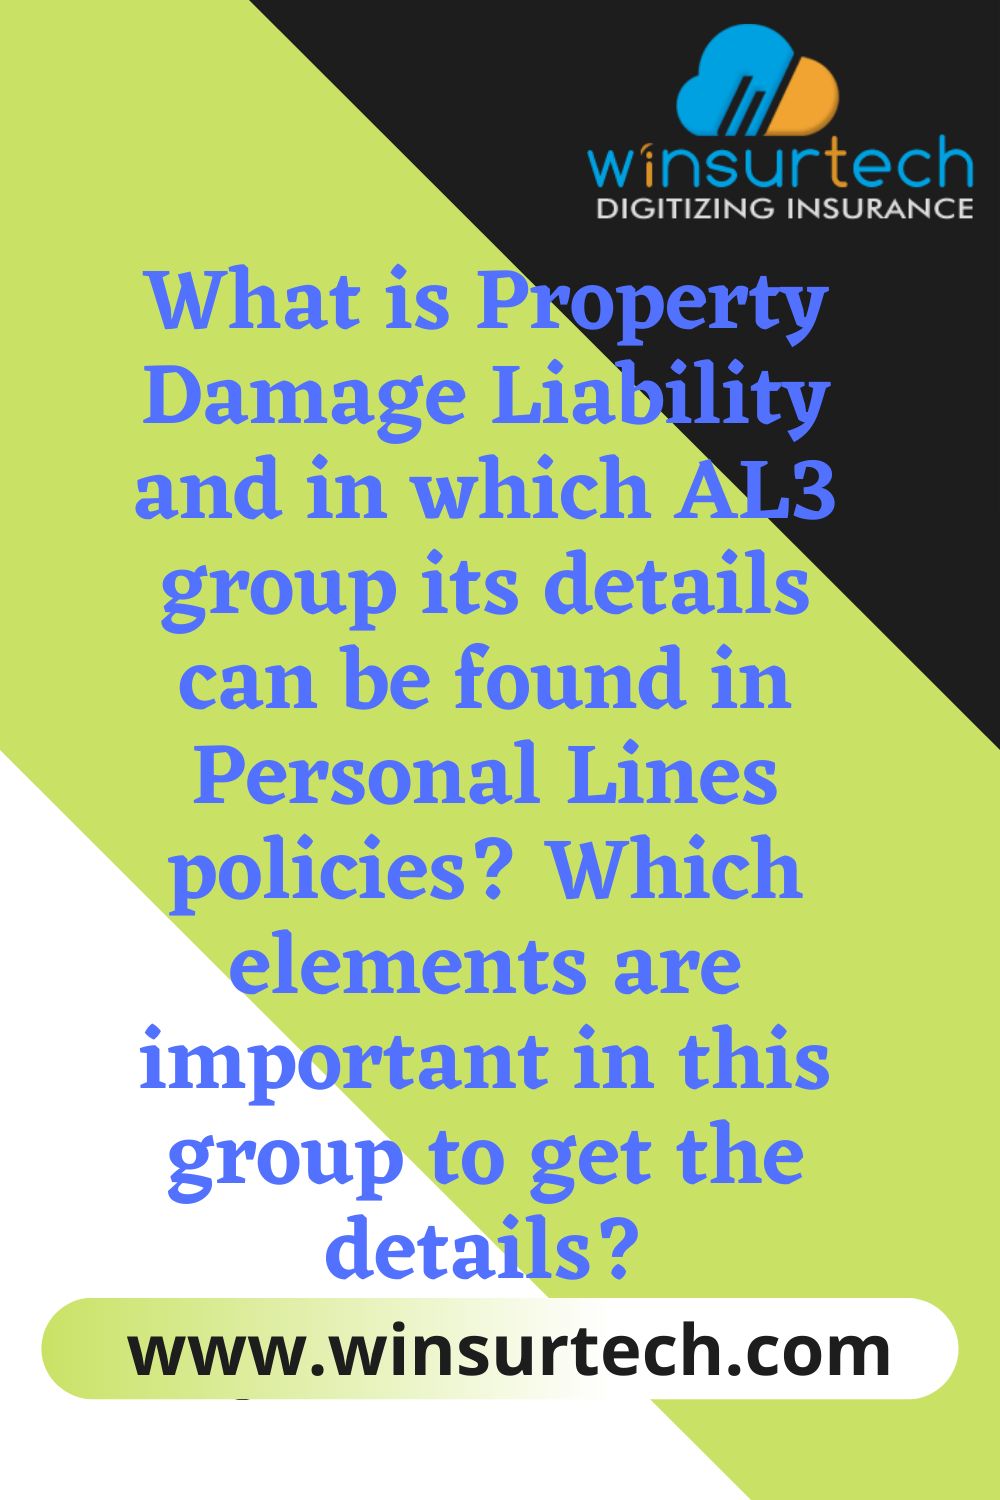 What is Property Damage Liability and in which AL3 group